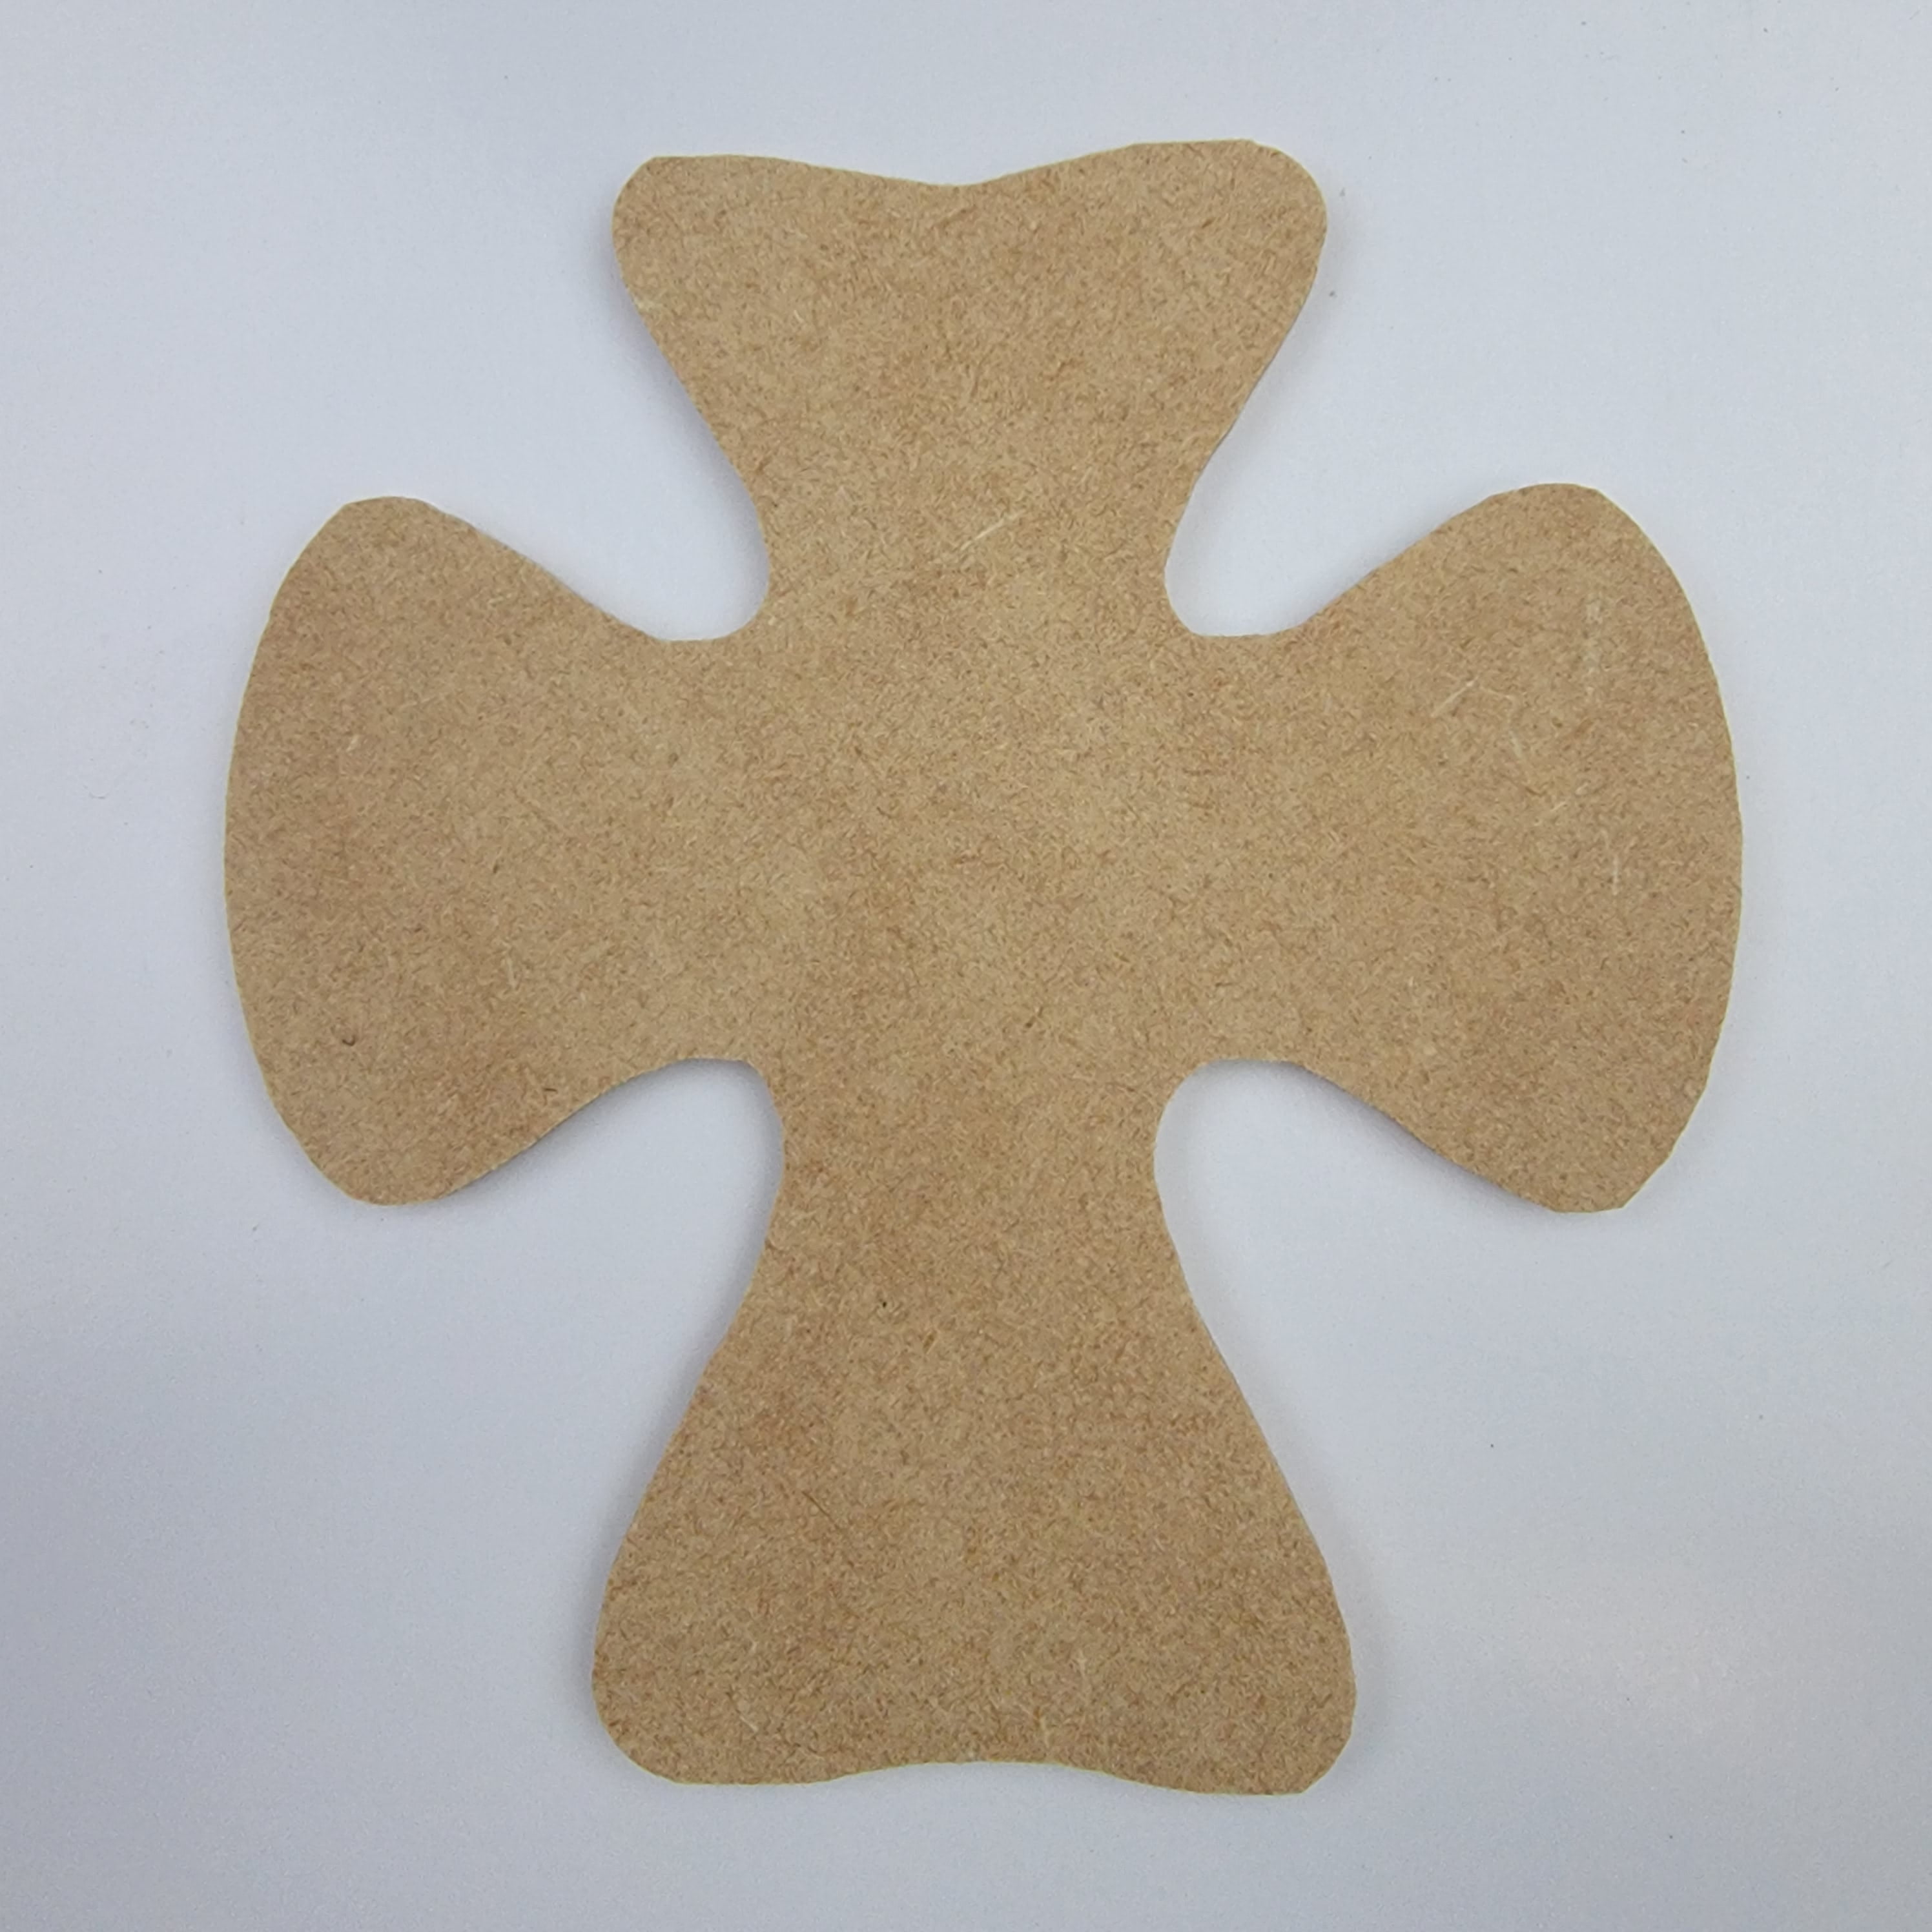 Wood Cross Unfinished Craft Mini Crosses 3 Inch 6 Pieces C02-149